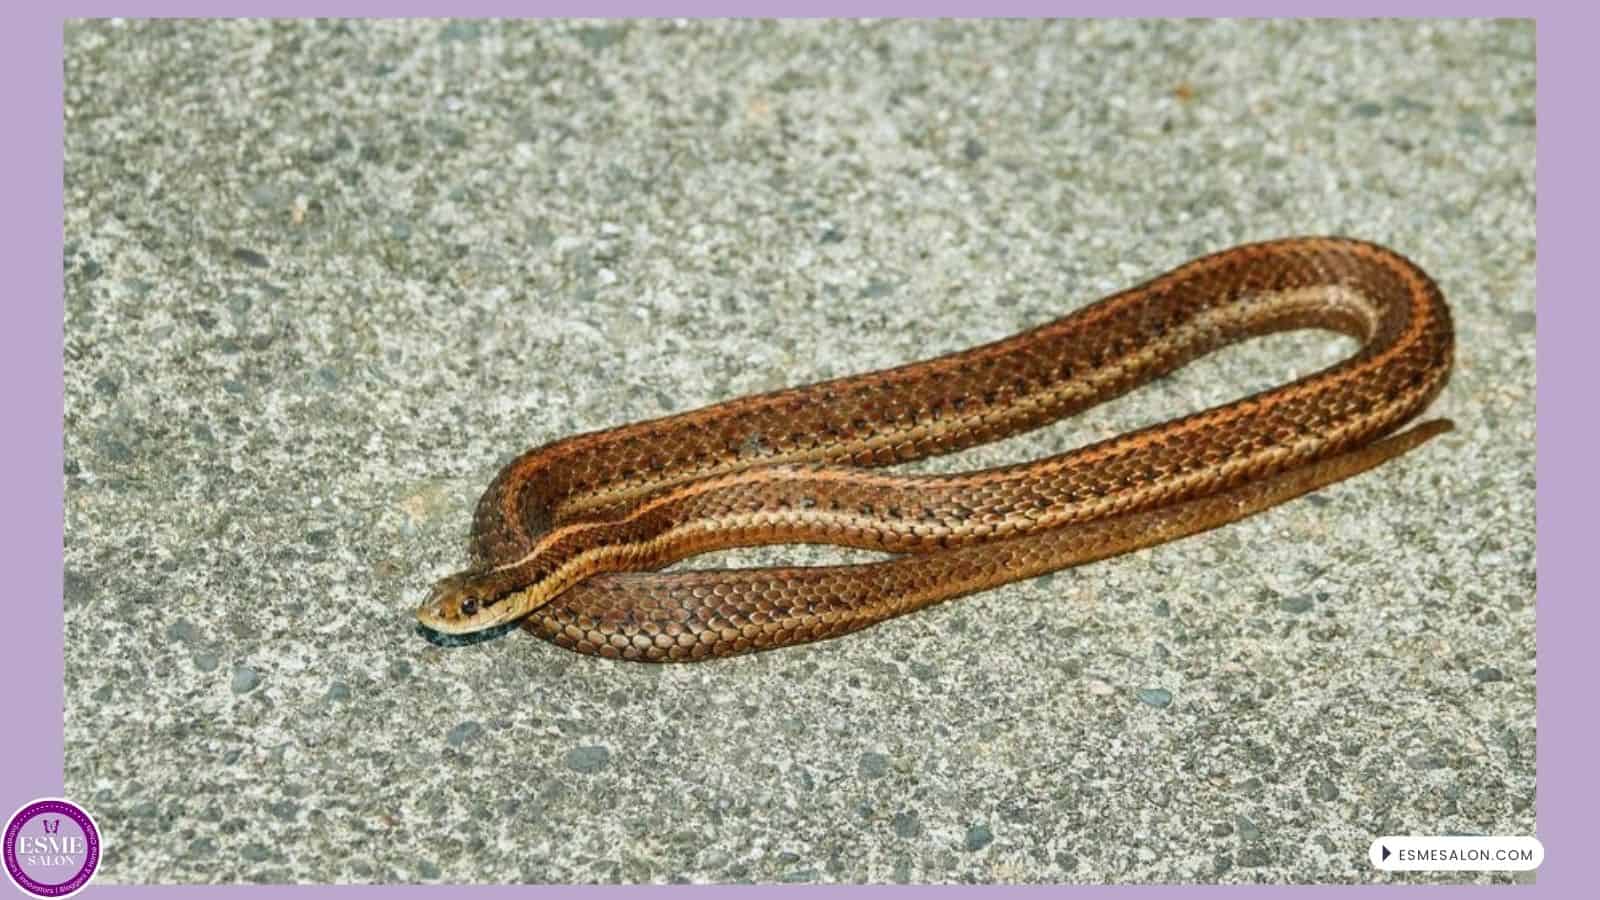 Unusual Visitor, a tiny Garter Snake we found next to our BBQ one evening after we prepared our dinner and ready to pack up and close the BBQ